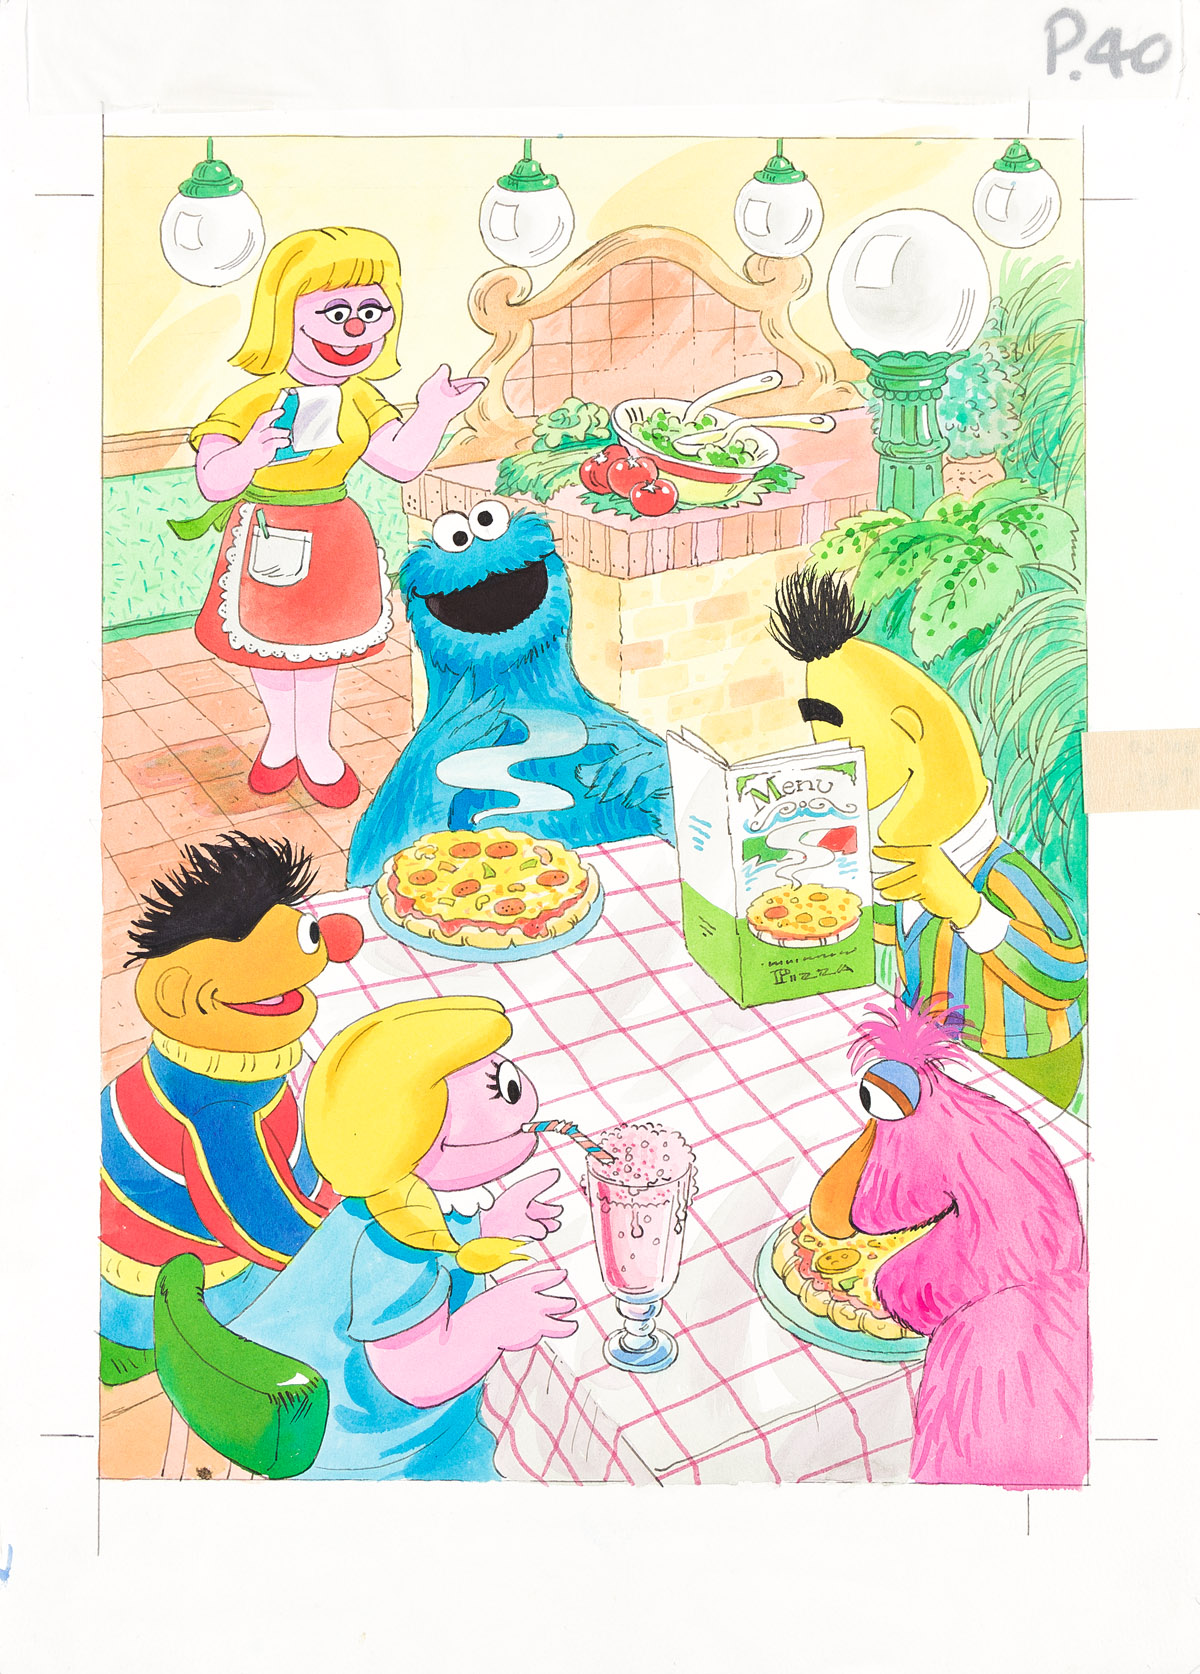 (SESAME STREET) Bert, Ernie, and Cookie Monster at a restaurant with friends.